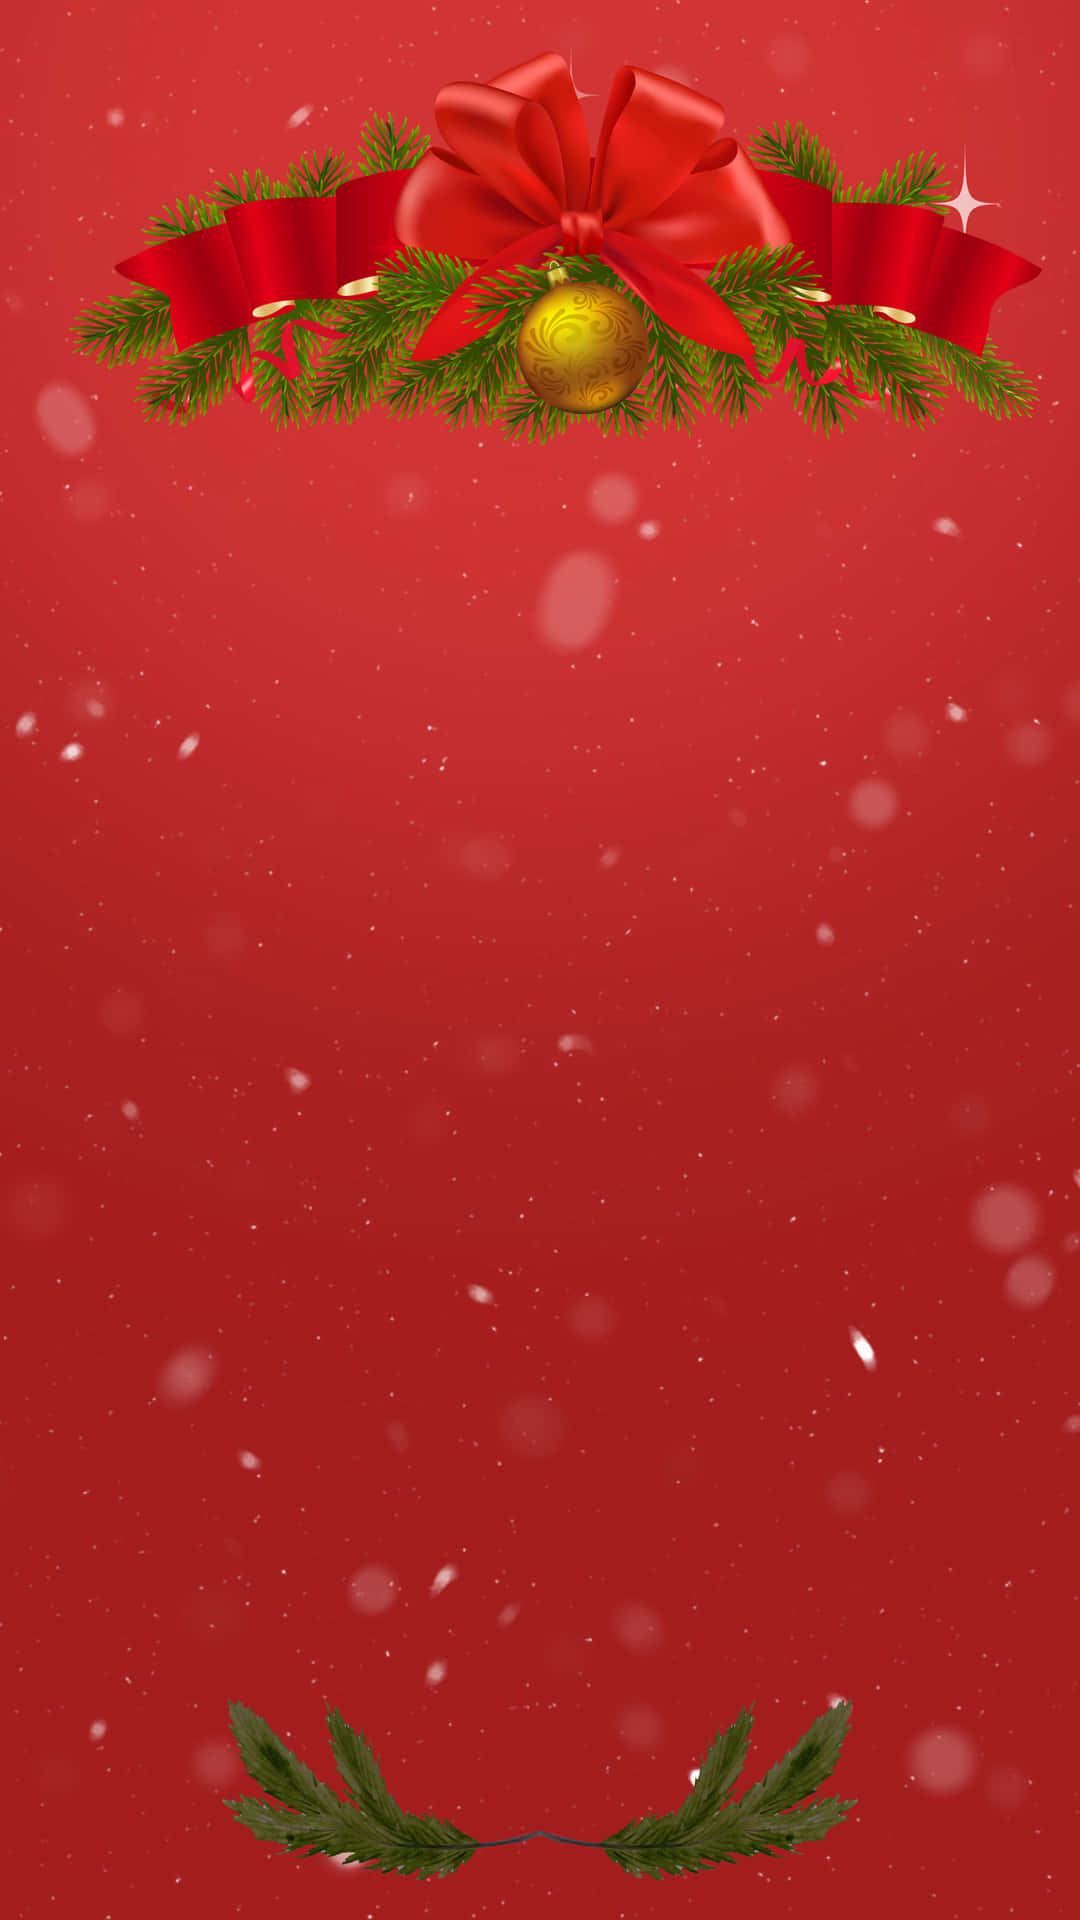 Download Festive Christmas Background Wallpaper | Wallpapers.com